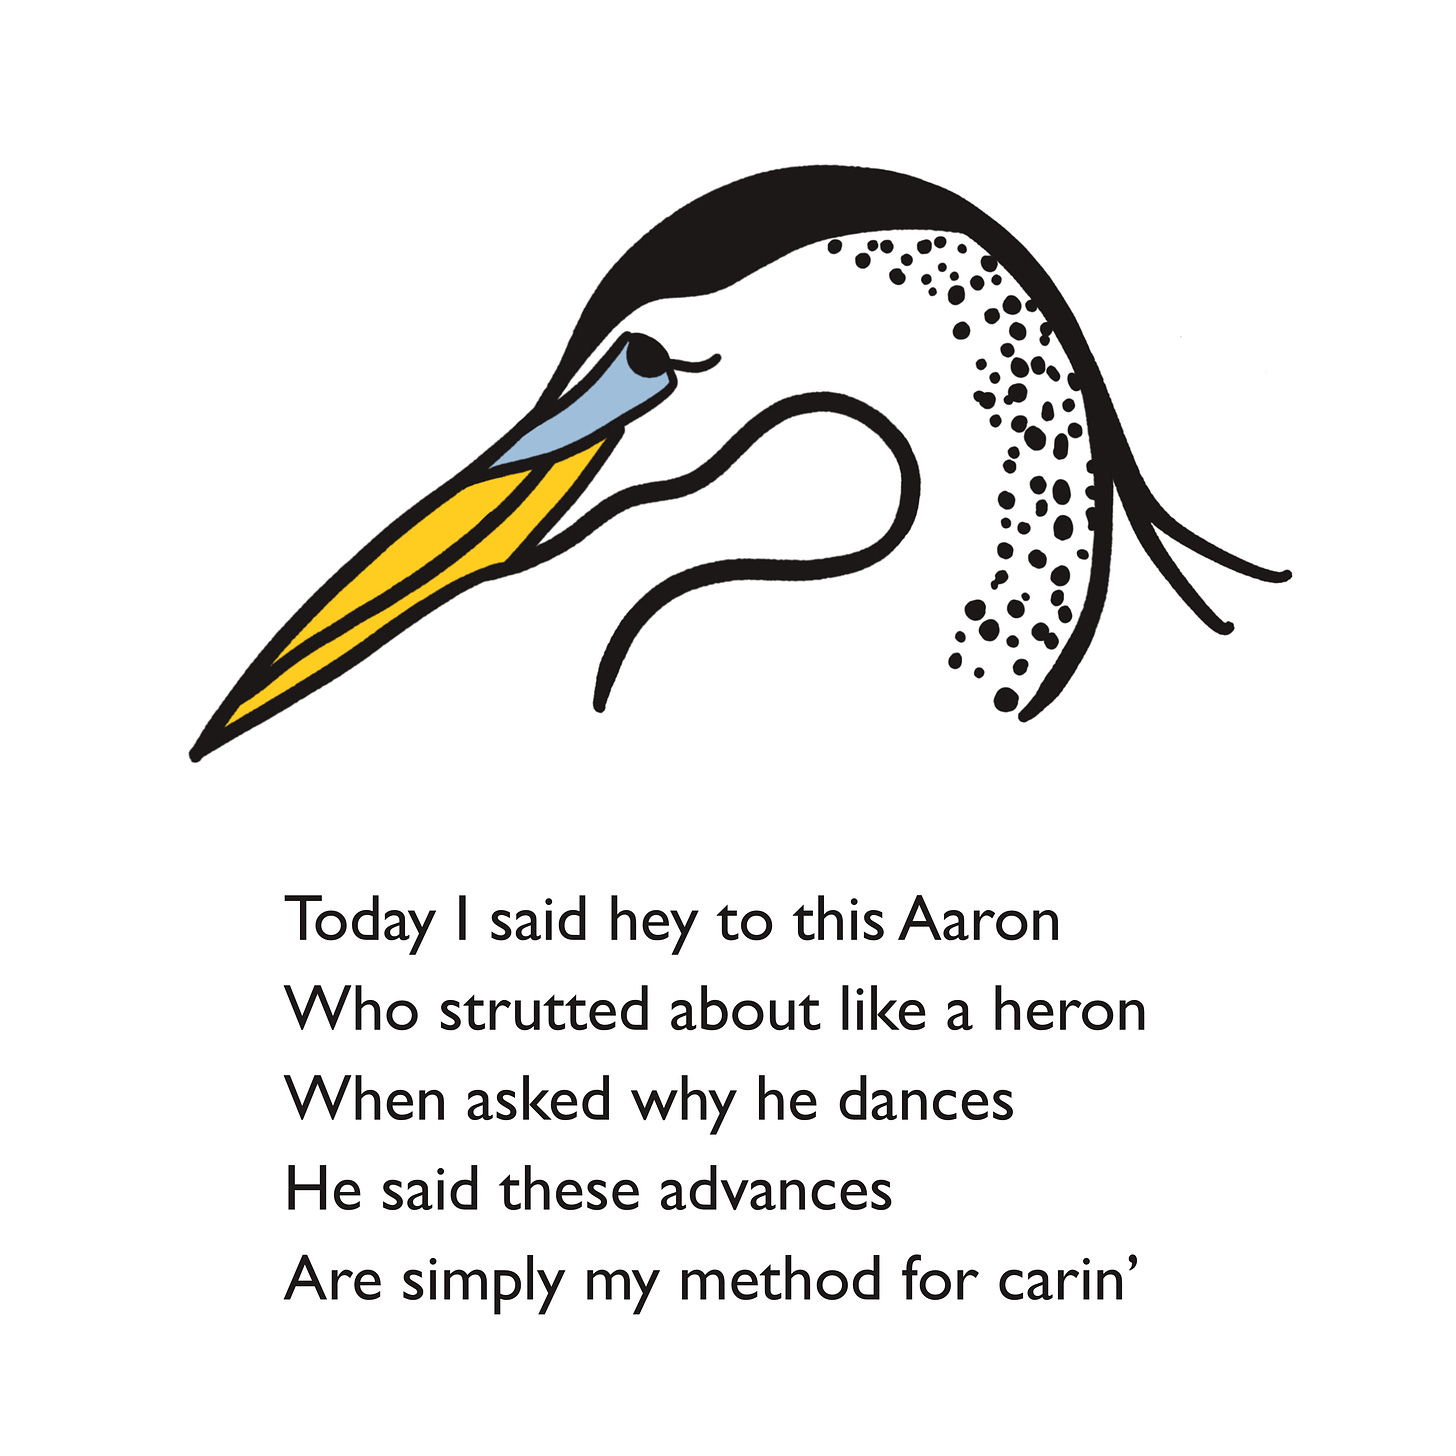 A hand-drawn illustration of a heron with a long, yellow beak and blue under its eyes.